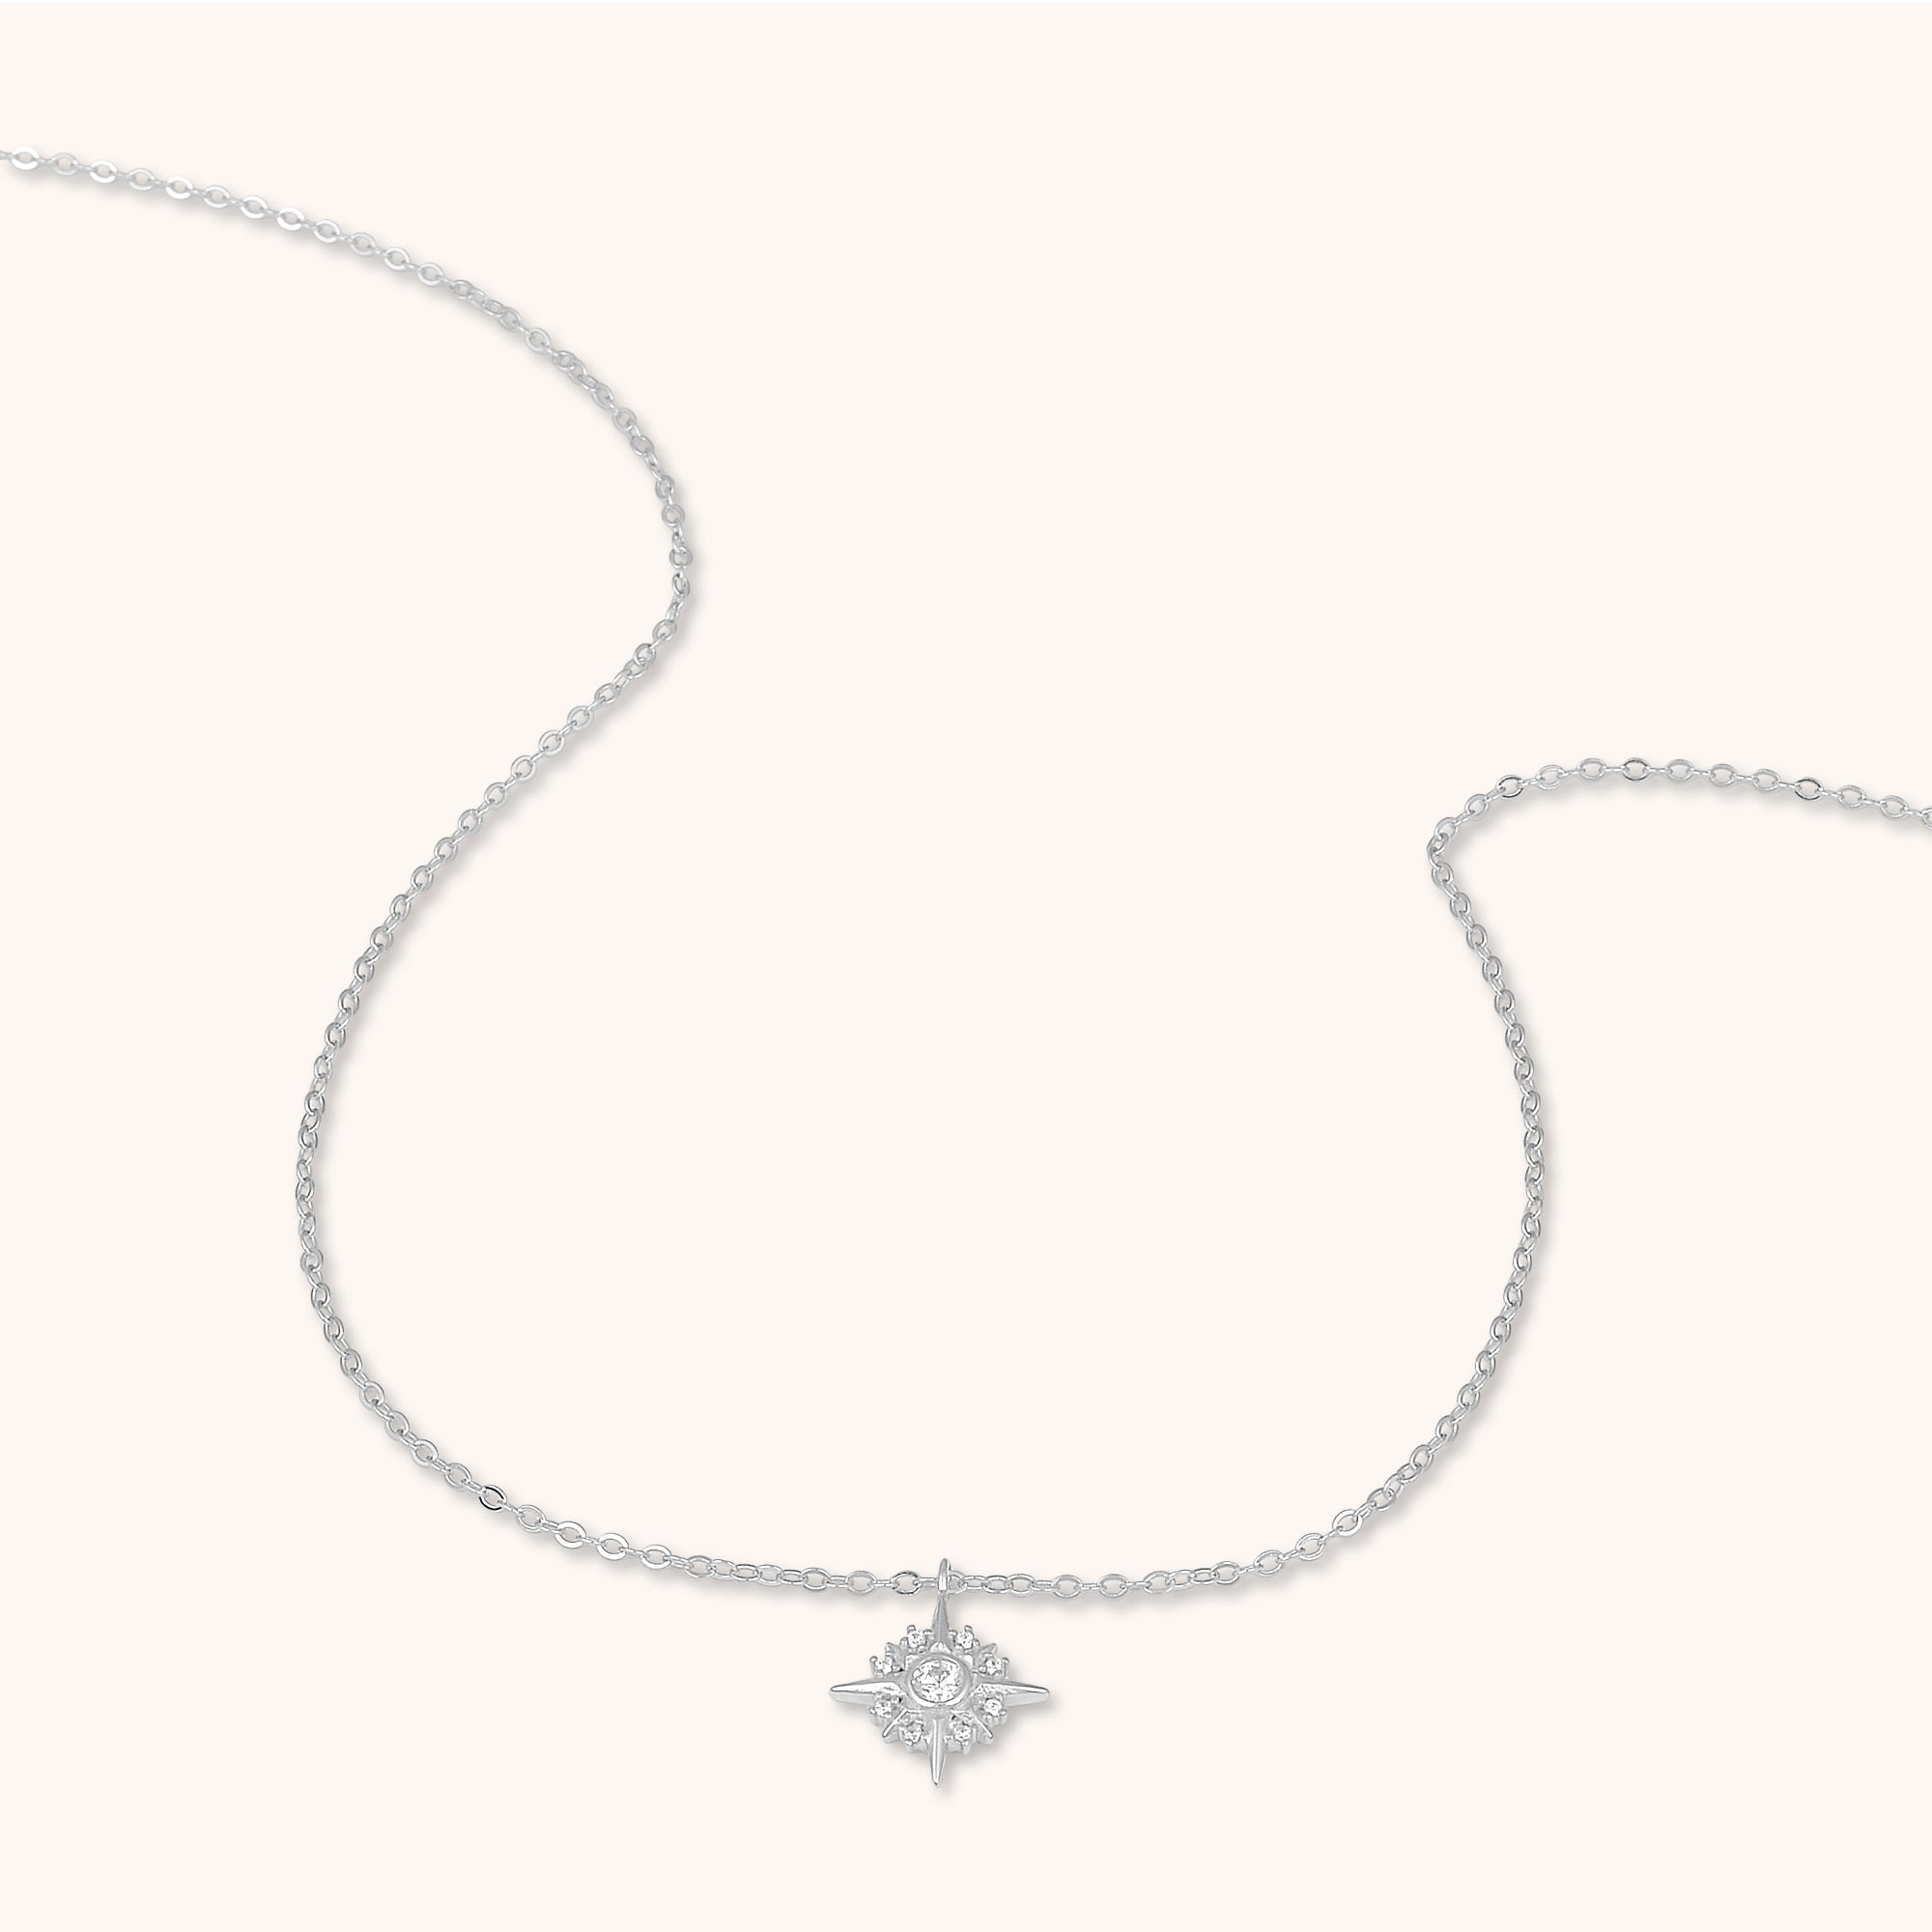 Radiant North Star Sapphire Necklace Silver